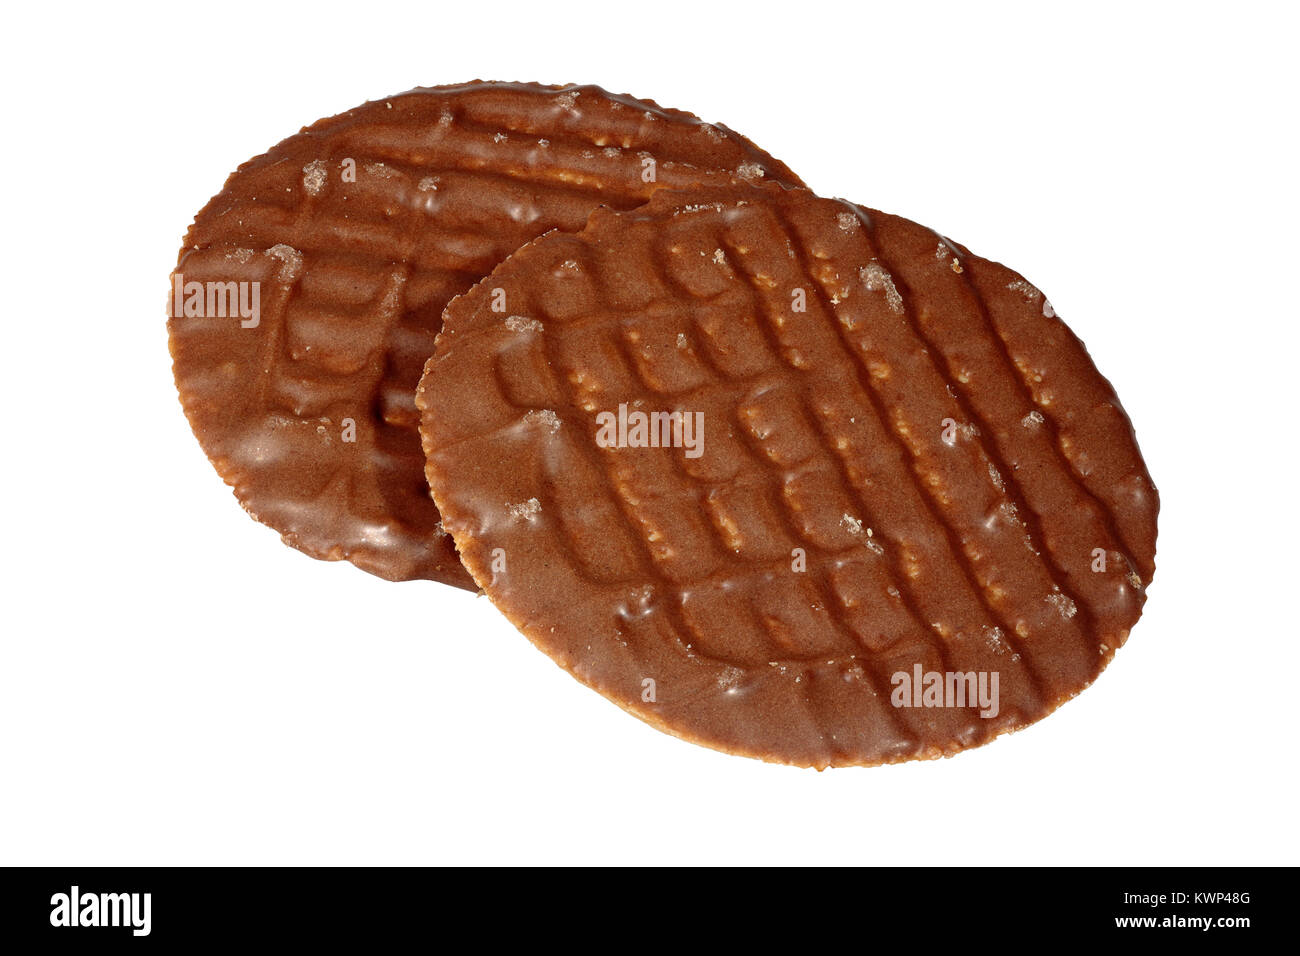 Two McVities Milk chocolate Digestive Thins Biscuits isolated on a white background Stock Photo